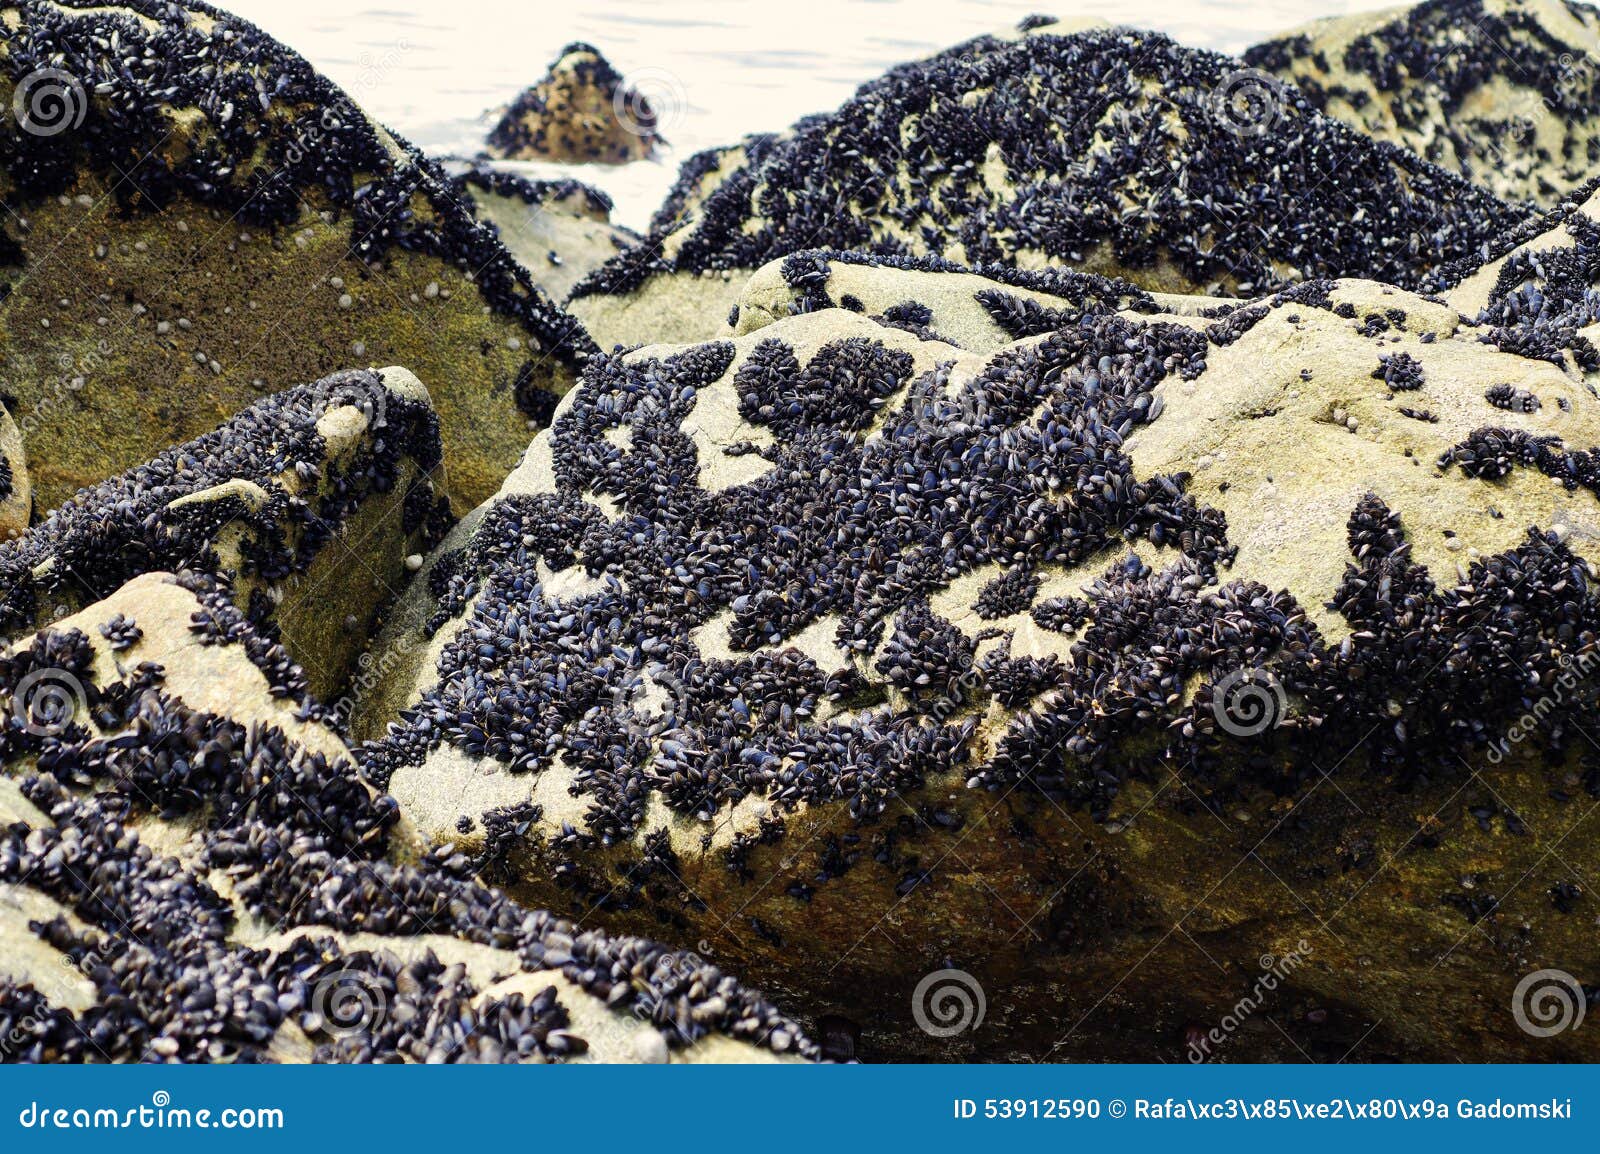 the mussels colony in parque natural do litoral on the north of portugal